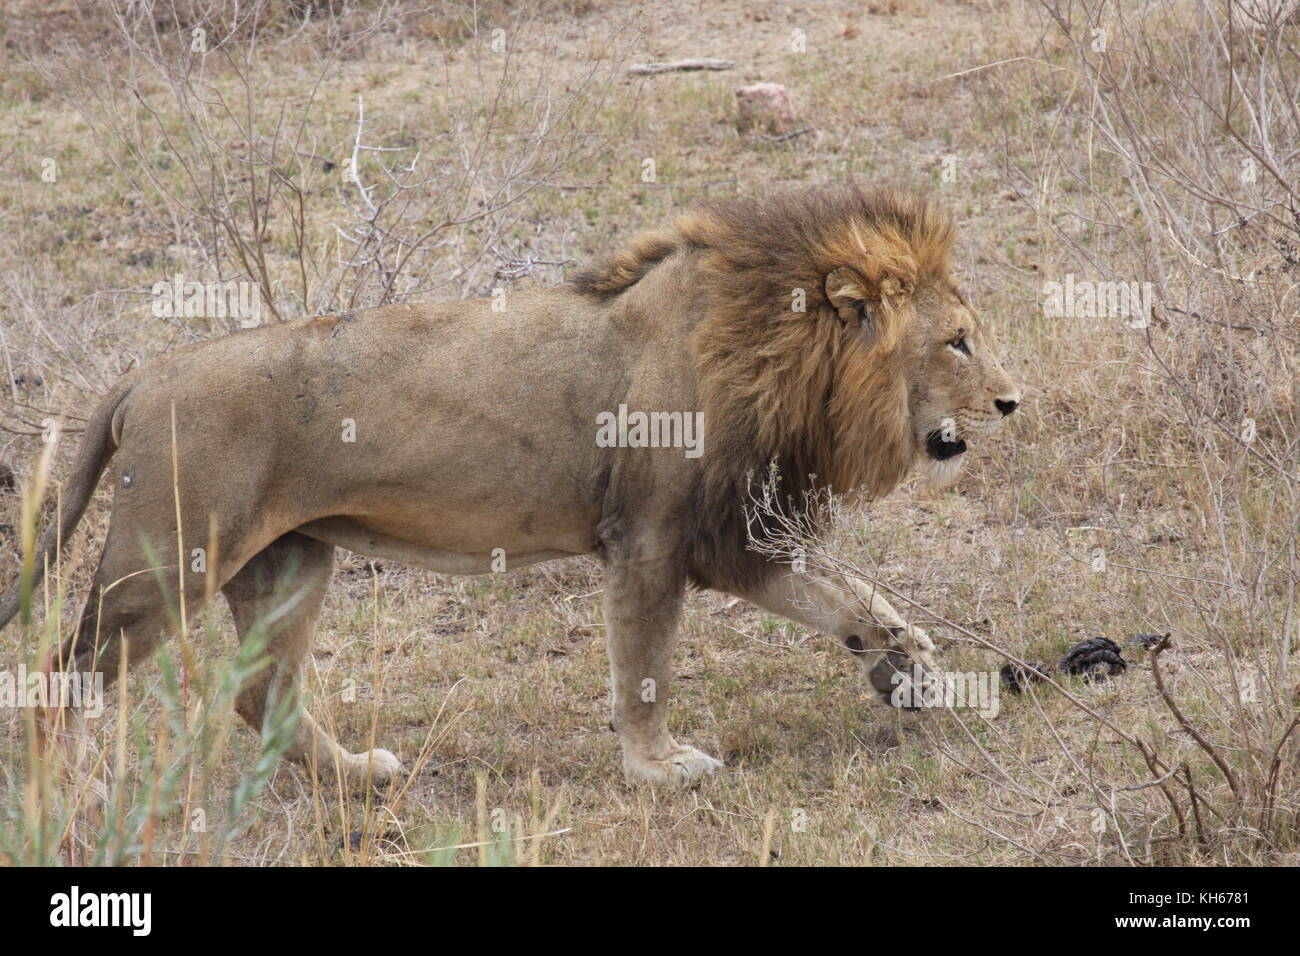 Lions in Kruger Stock Photo - Alamy